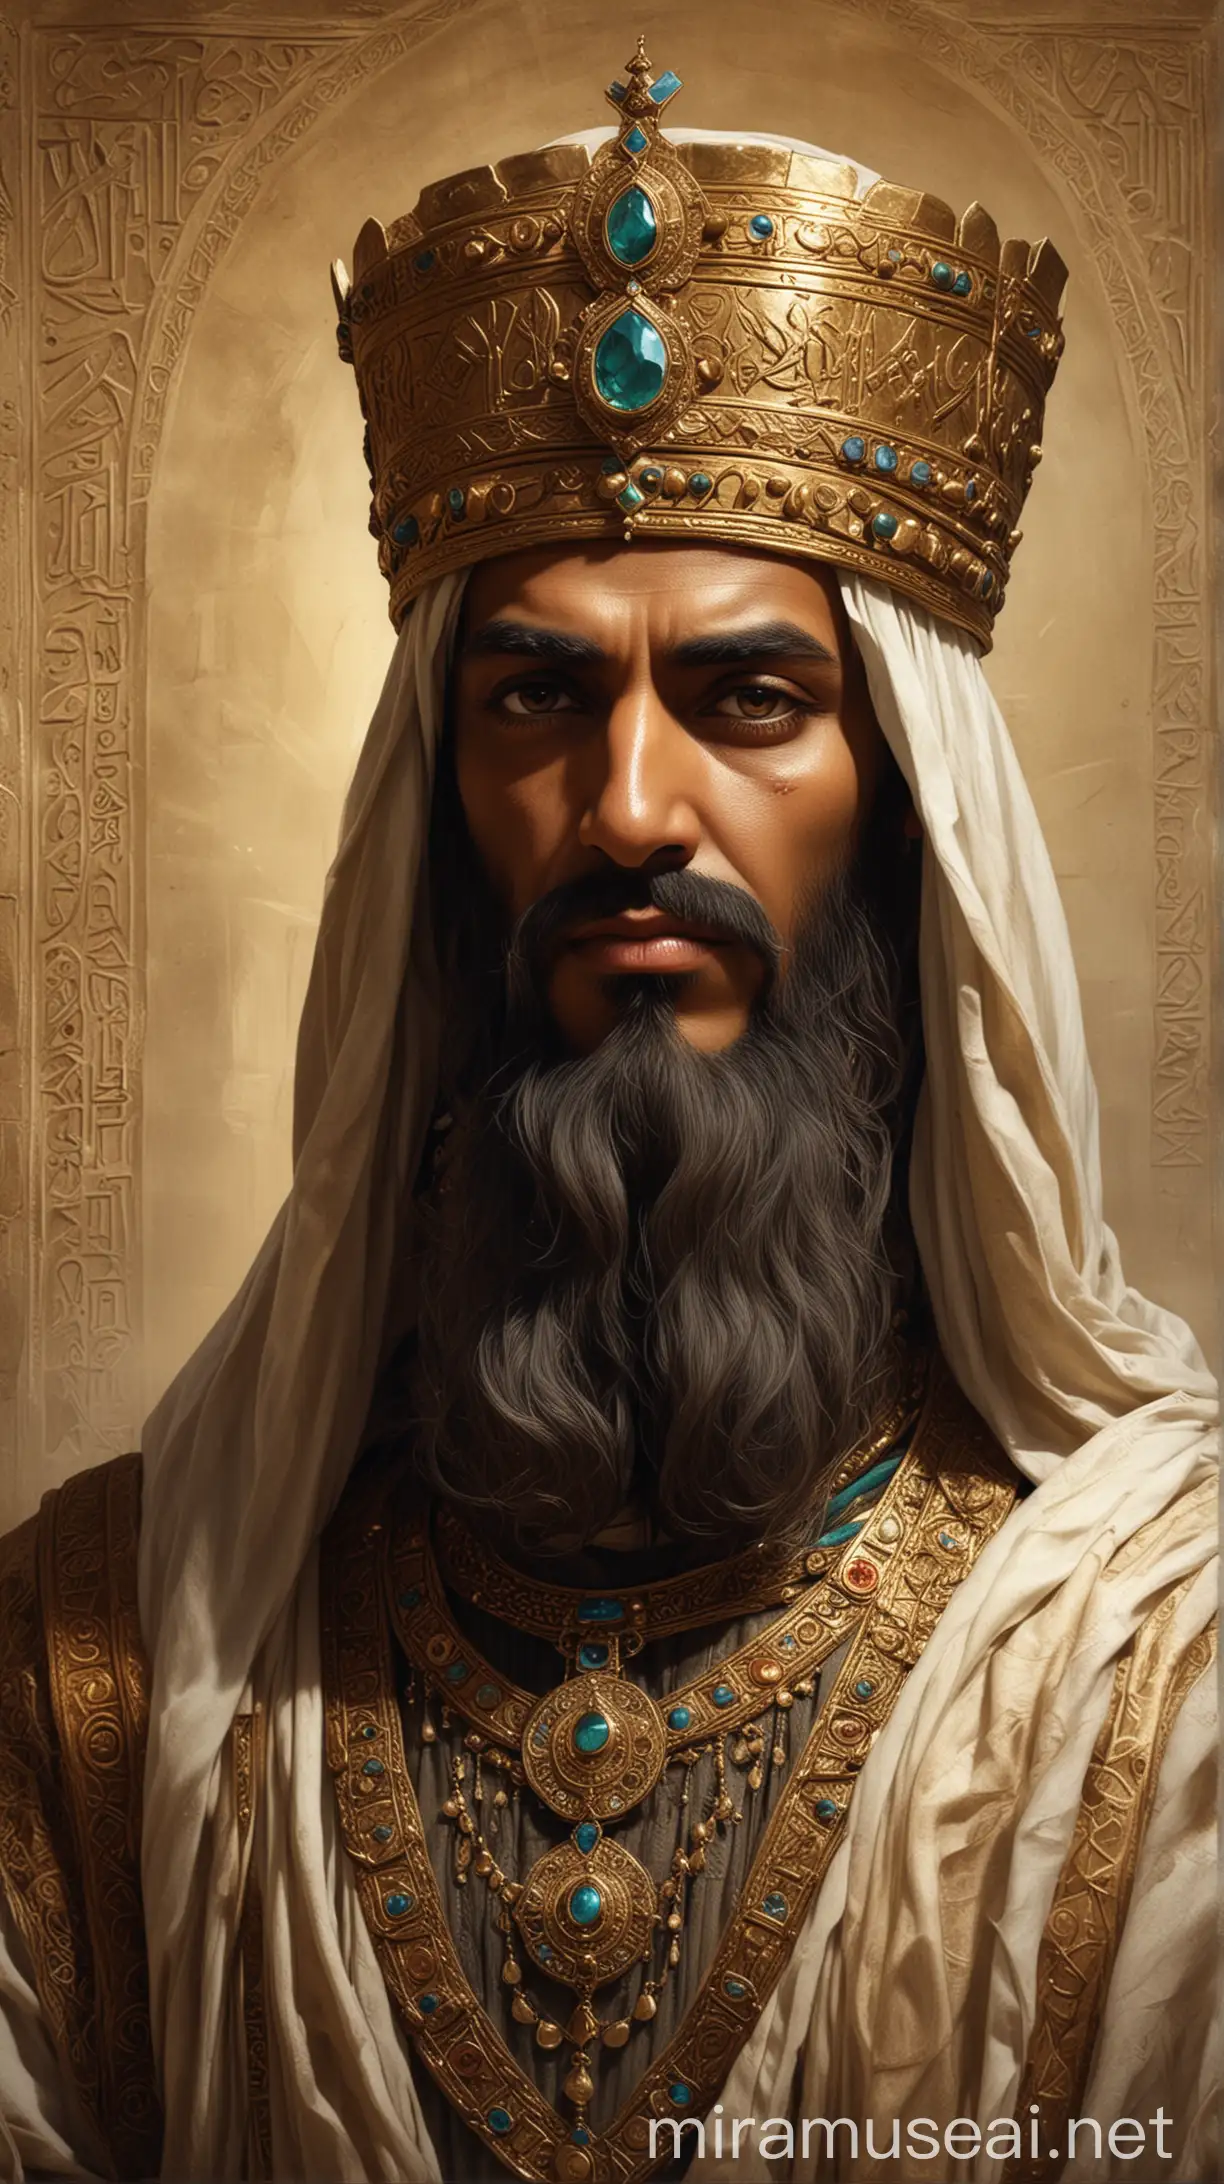 Create an image depicting an Arabian ancient king, Chushanrishathaim, with a stern and imposing appearance. He should be shown in a grand Mesopotamian palace, dressed in regal attire that reflects his power and authority. The setting should hint at the 12th century BC with appropriate historical details.in ancient world 